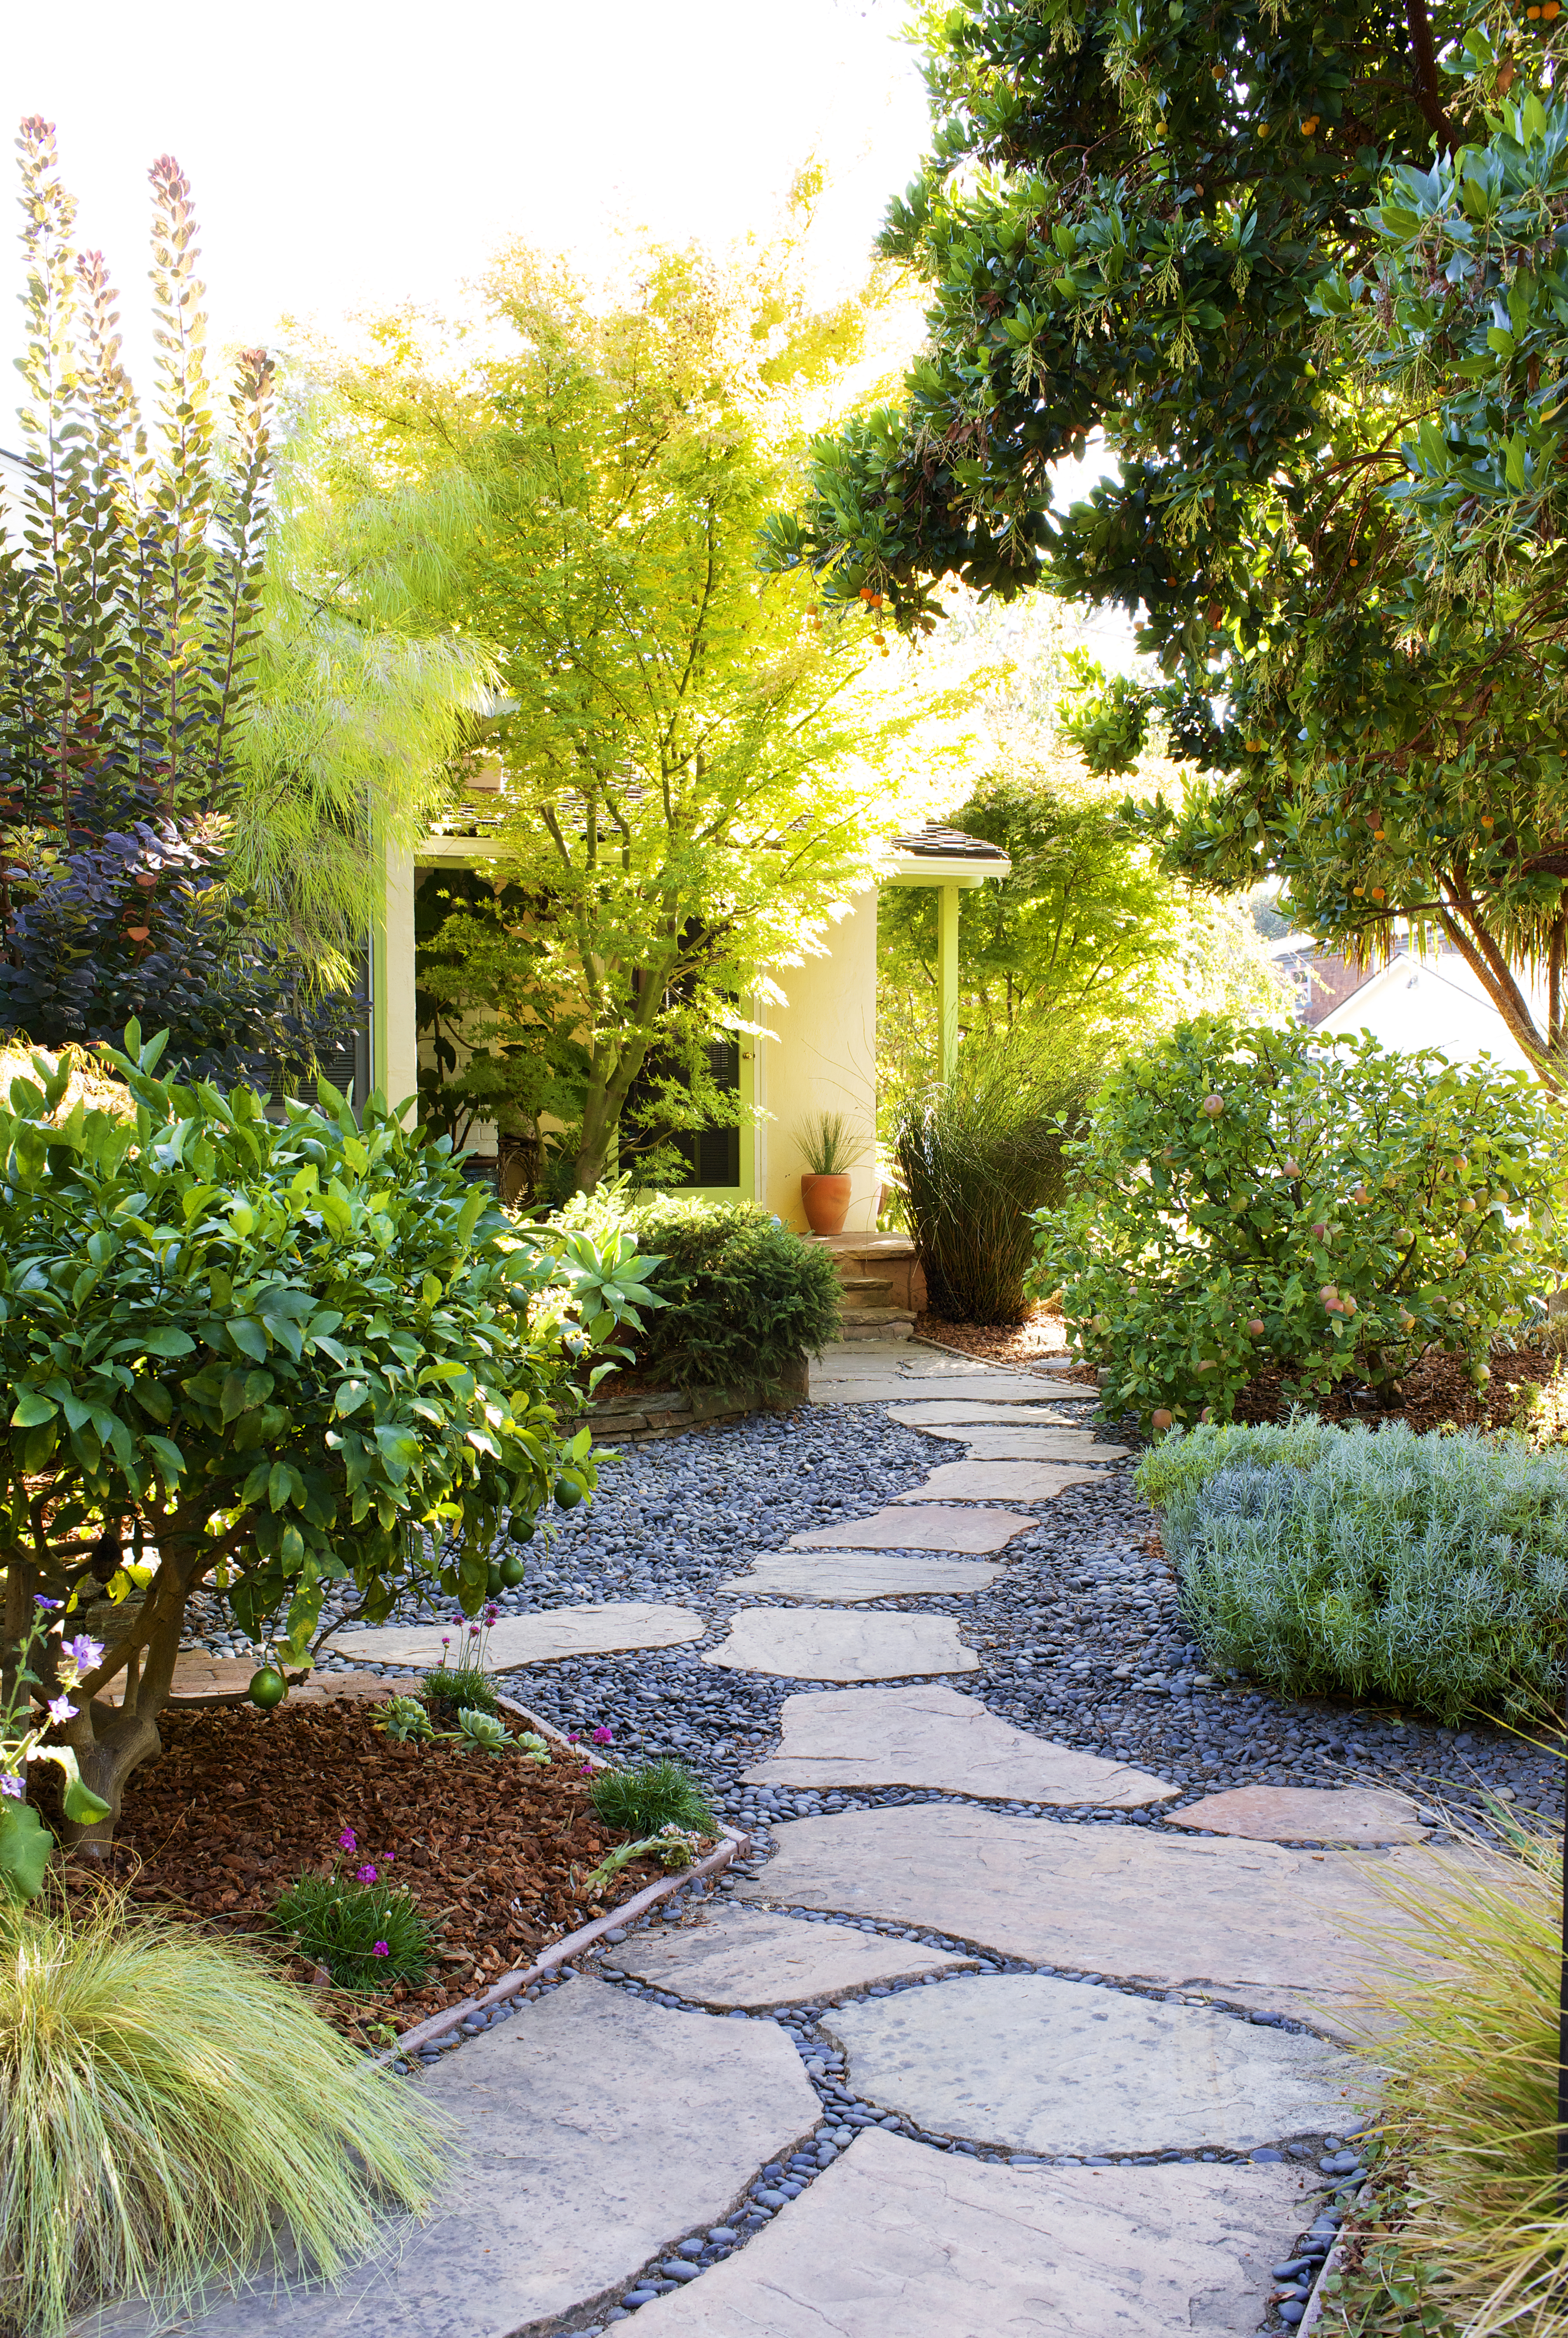 Lawn-free landscaping ideas